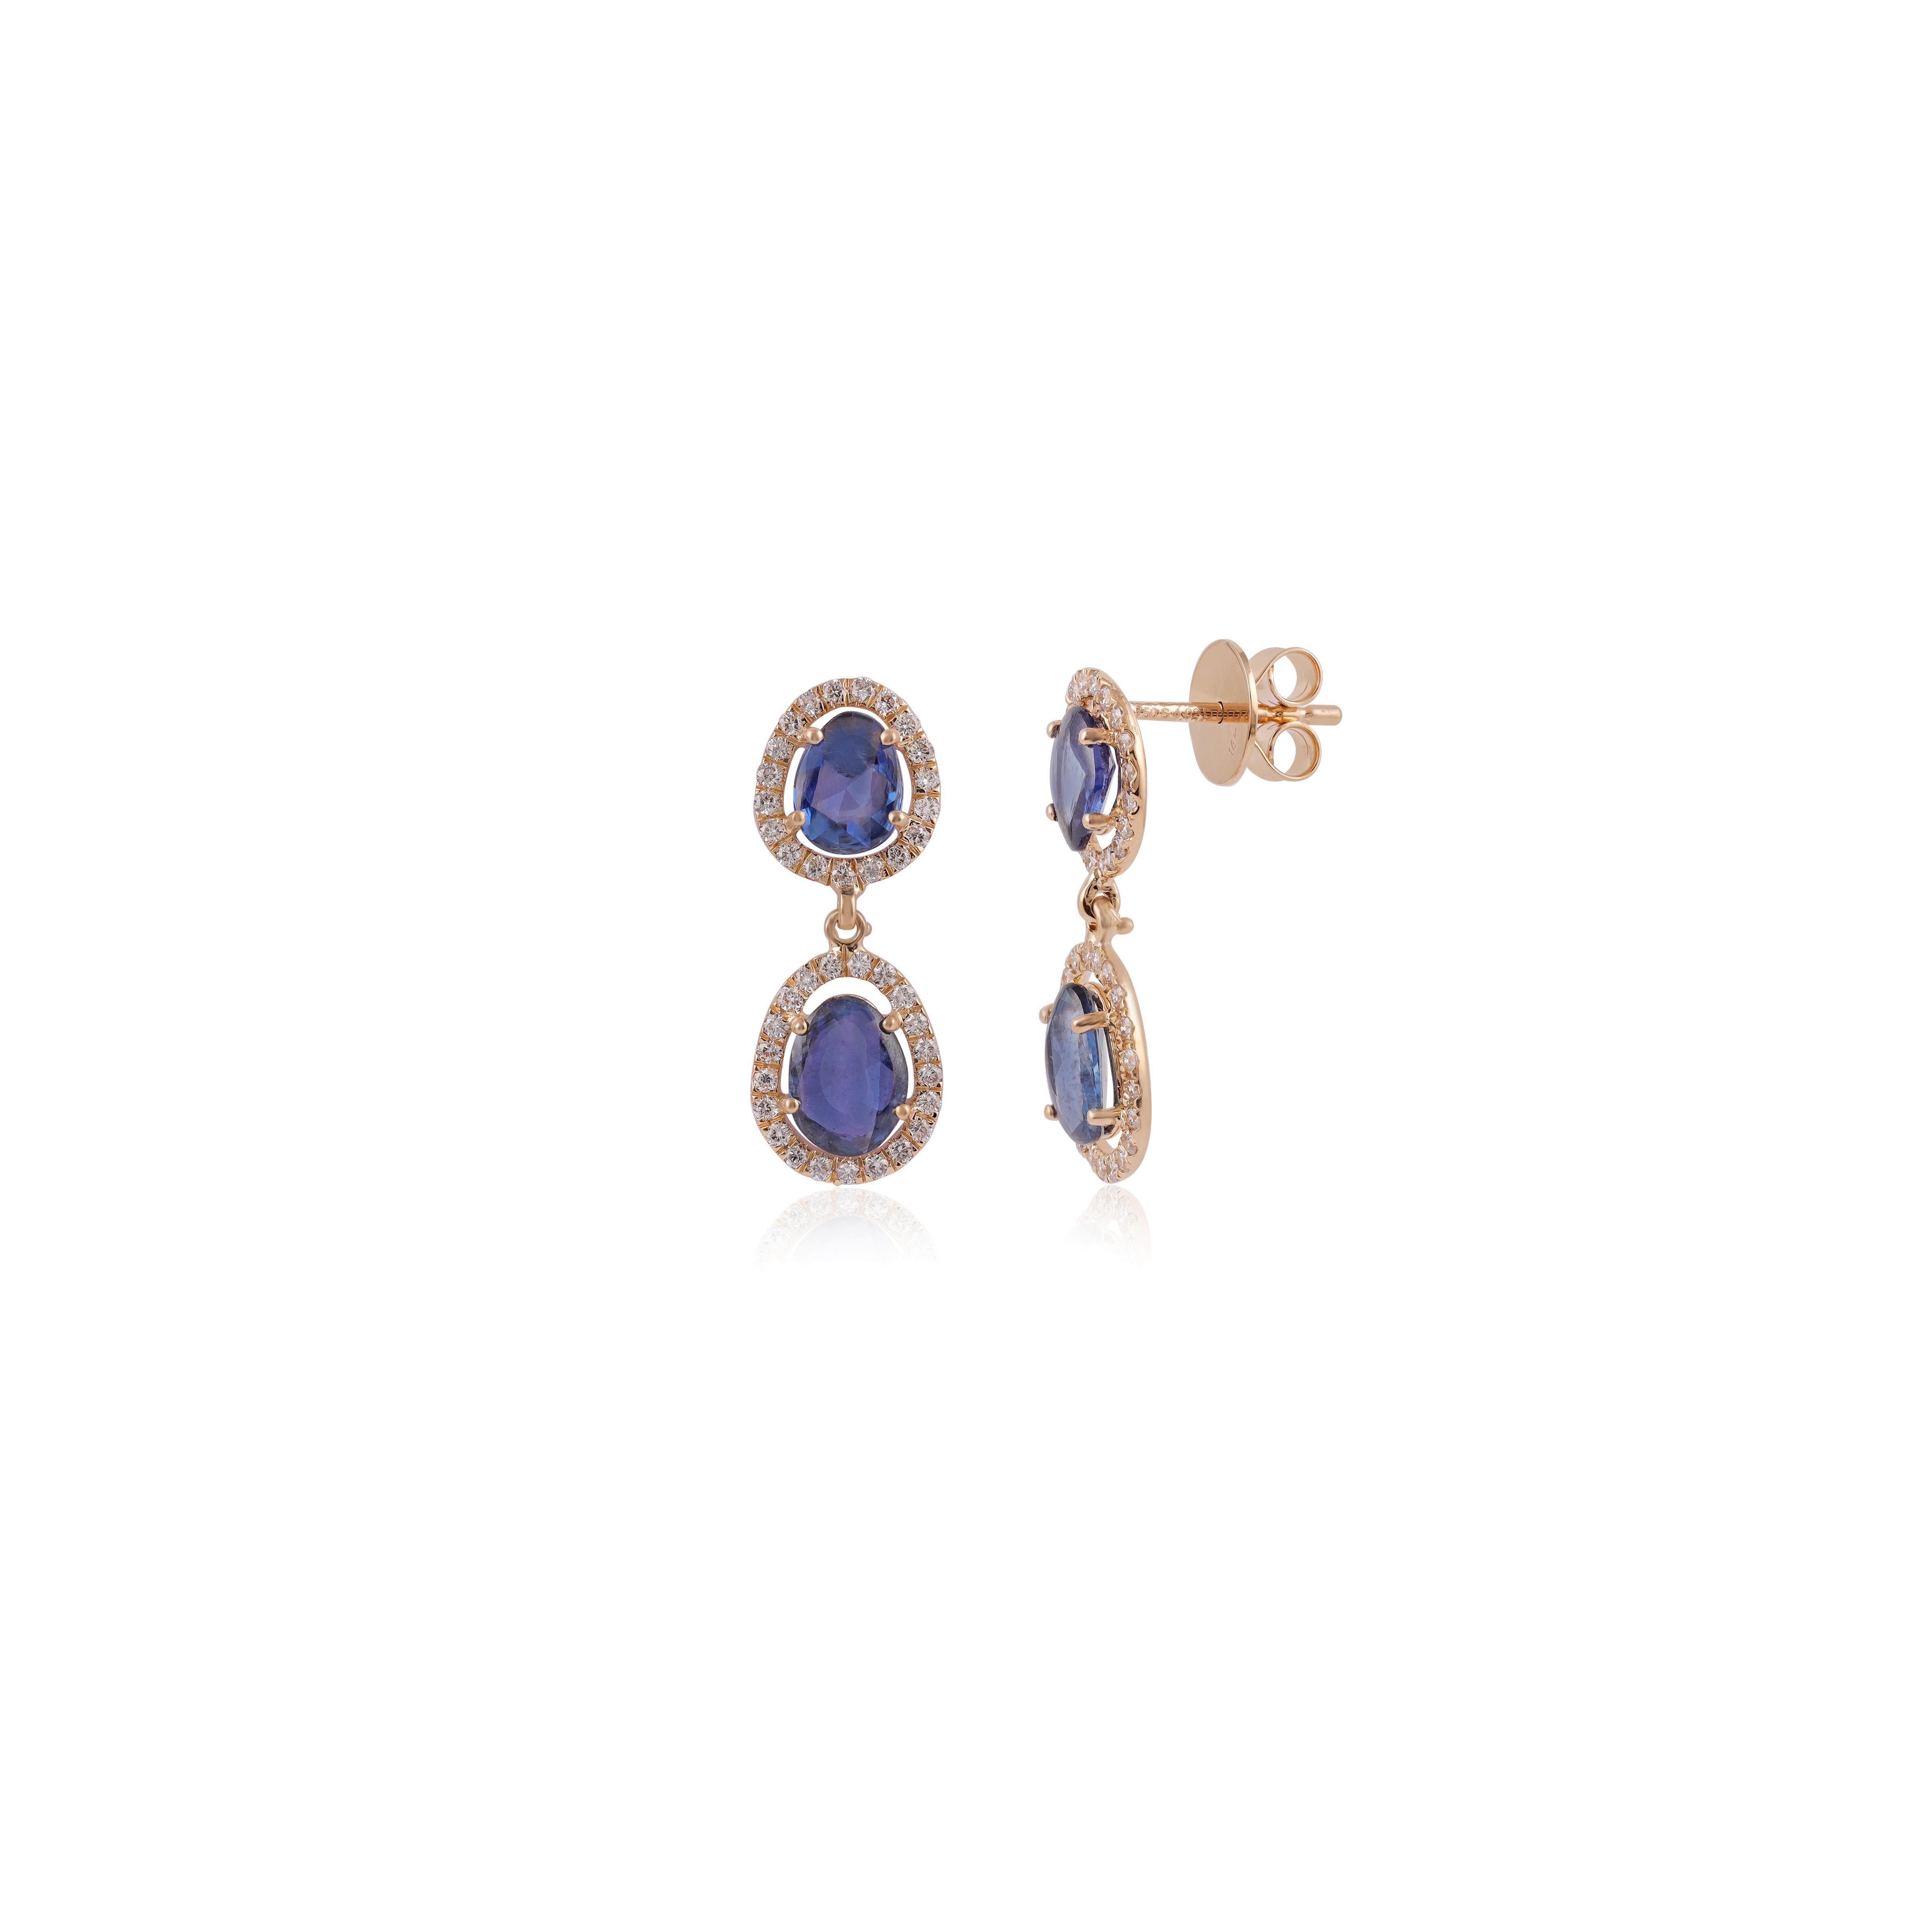 Contemporary 4.03 Carat Blue Sapphire and Diamond Earring Studded in 18 Karat Yellow Gold For Sale